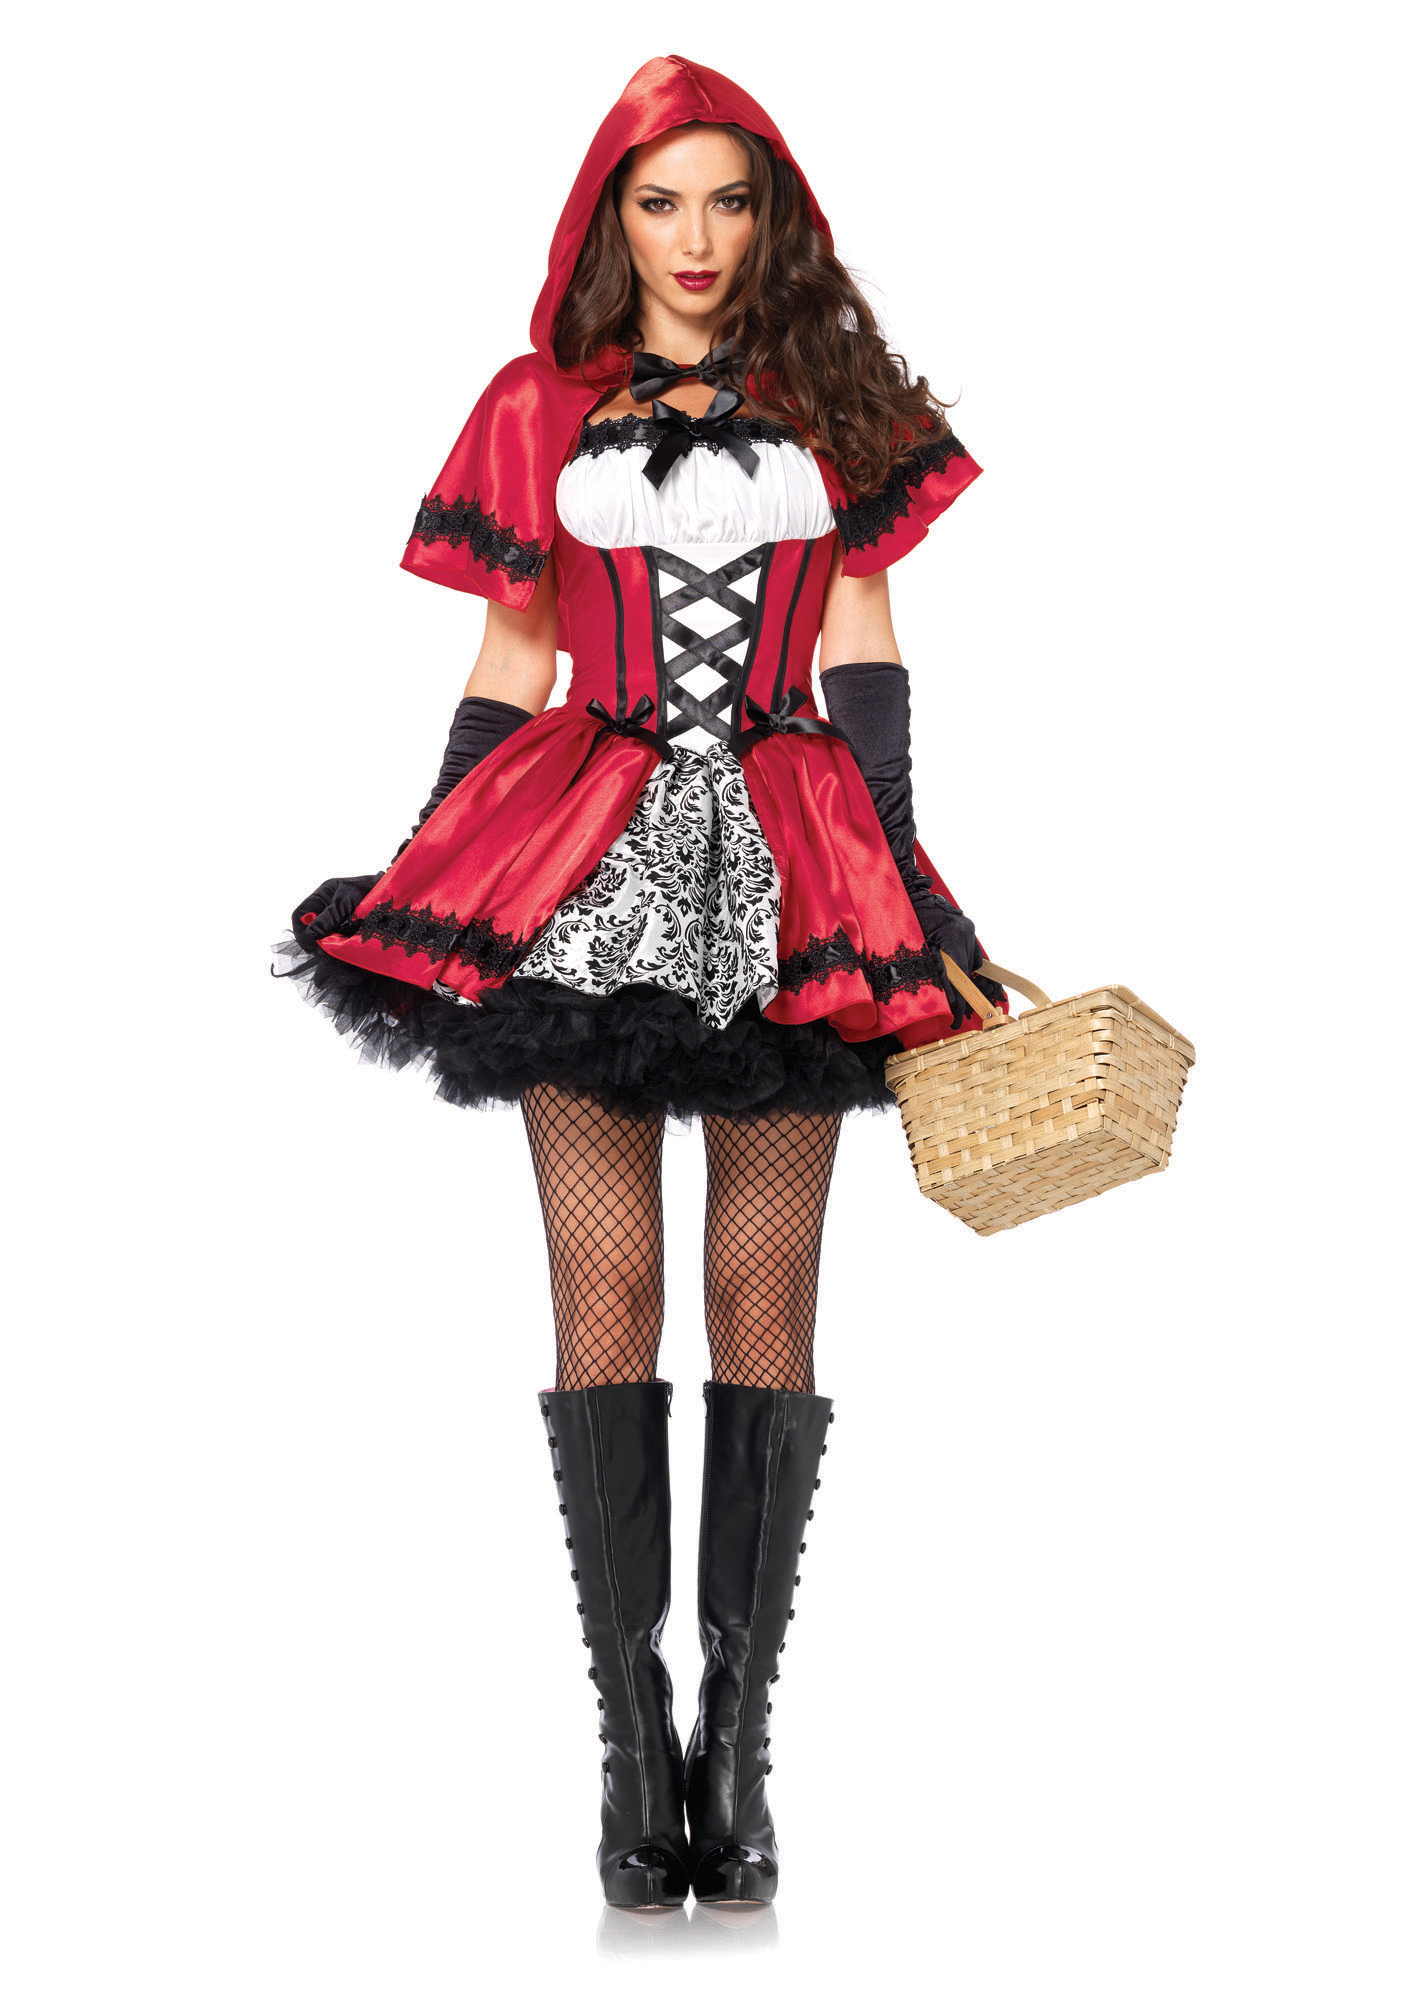 Leg Avenue Women's 2 Piece Gothic Red Riding Hood - Halloween Costumes for Women